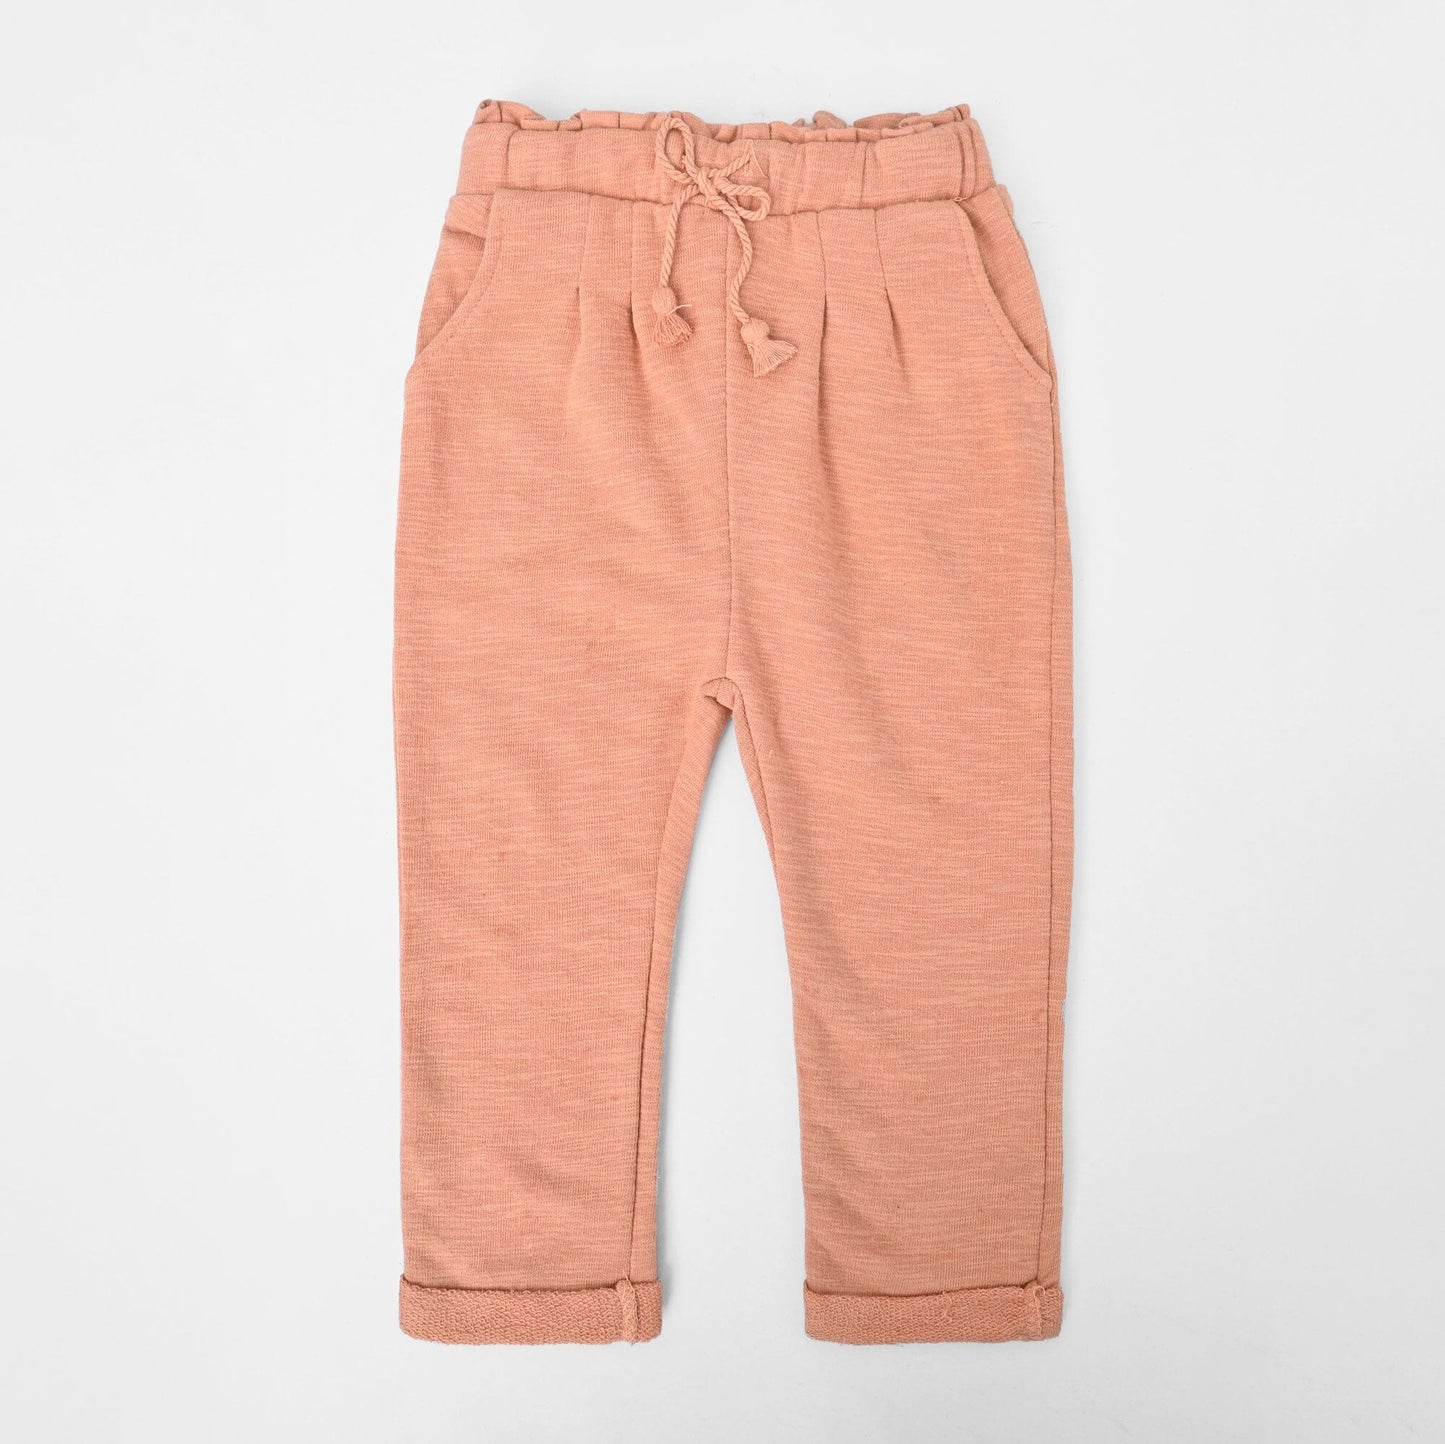 Genuine ZR Baby Girls Terry Trousers Girl's Trousers SNC Peach 9-12 Months 